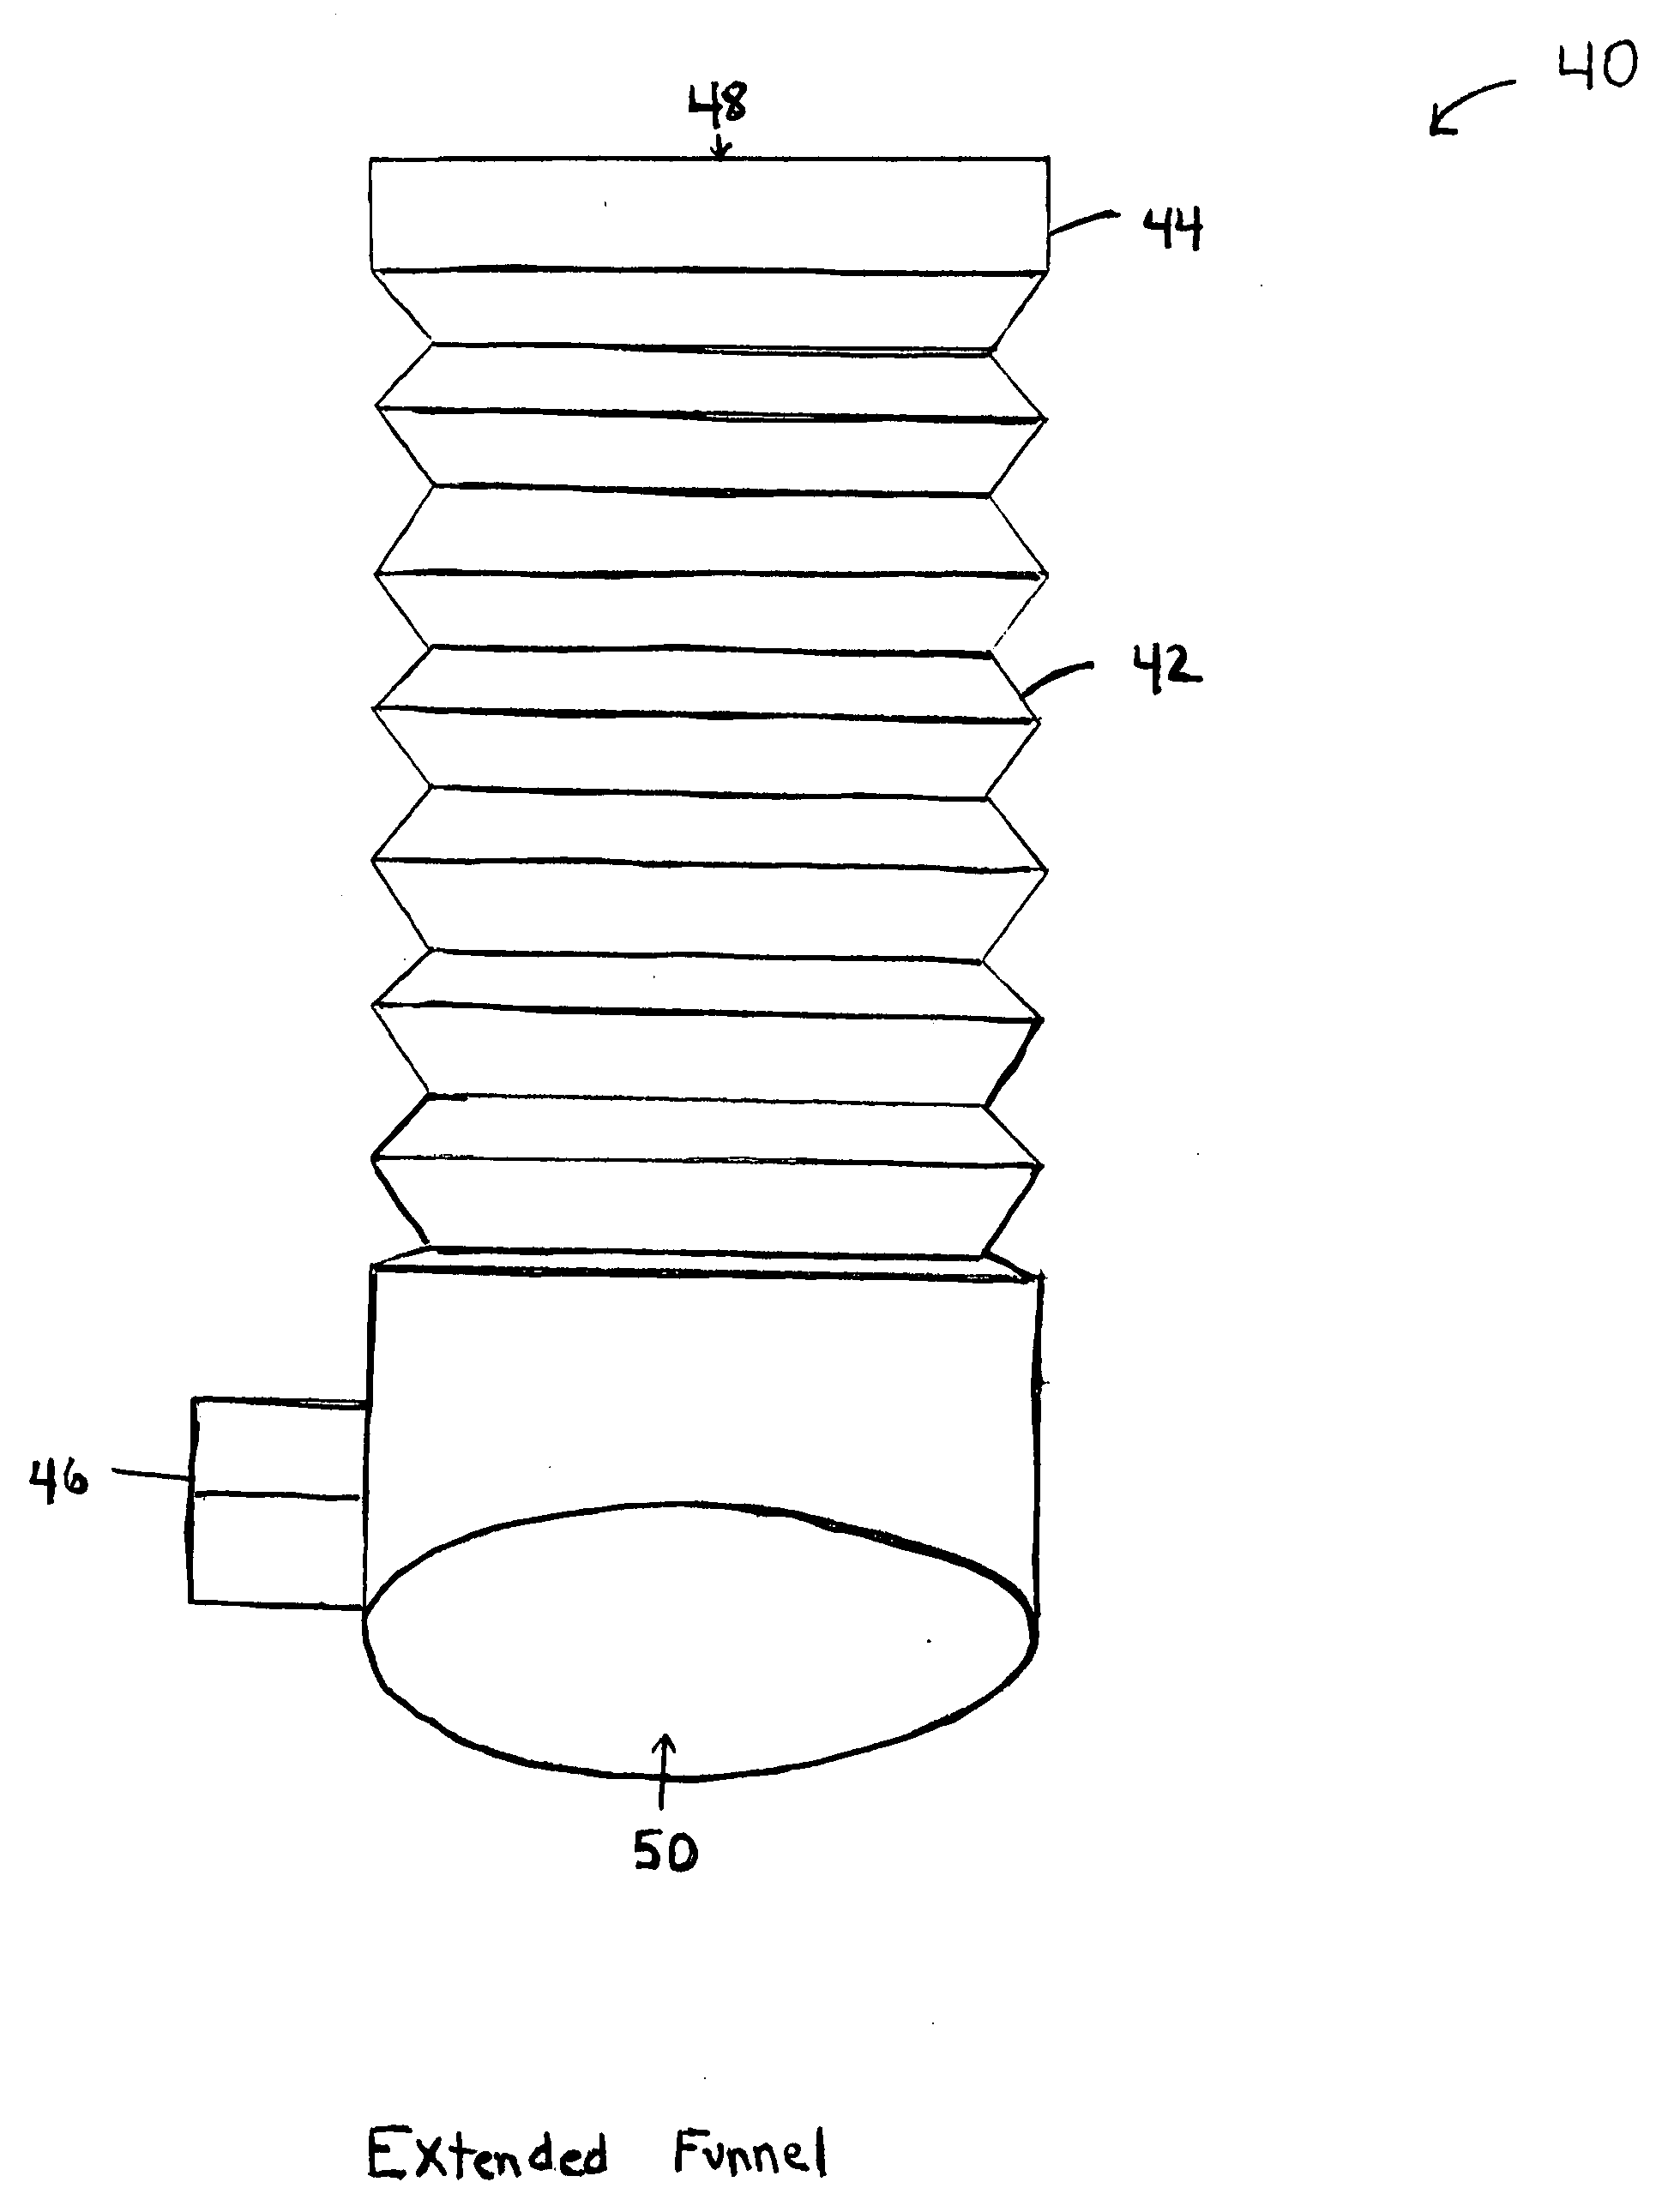 Funnel in combination with a commercial appliance